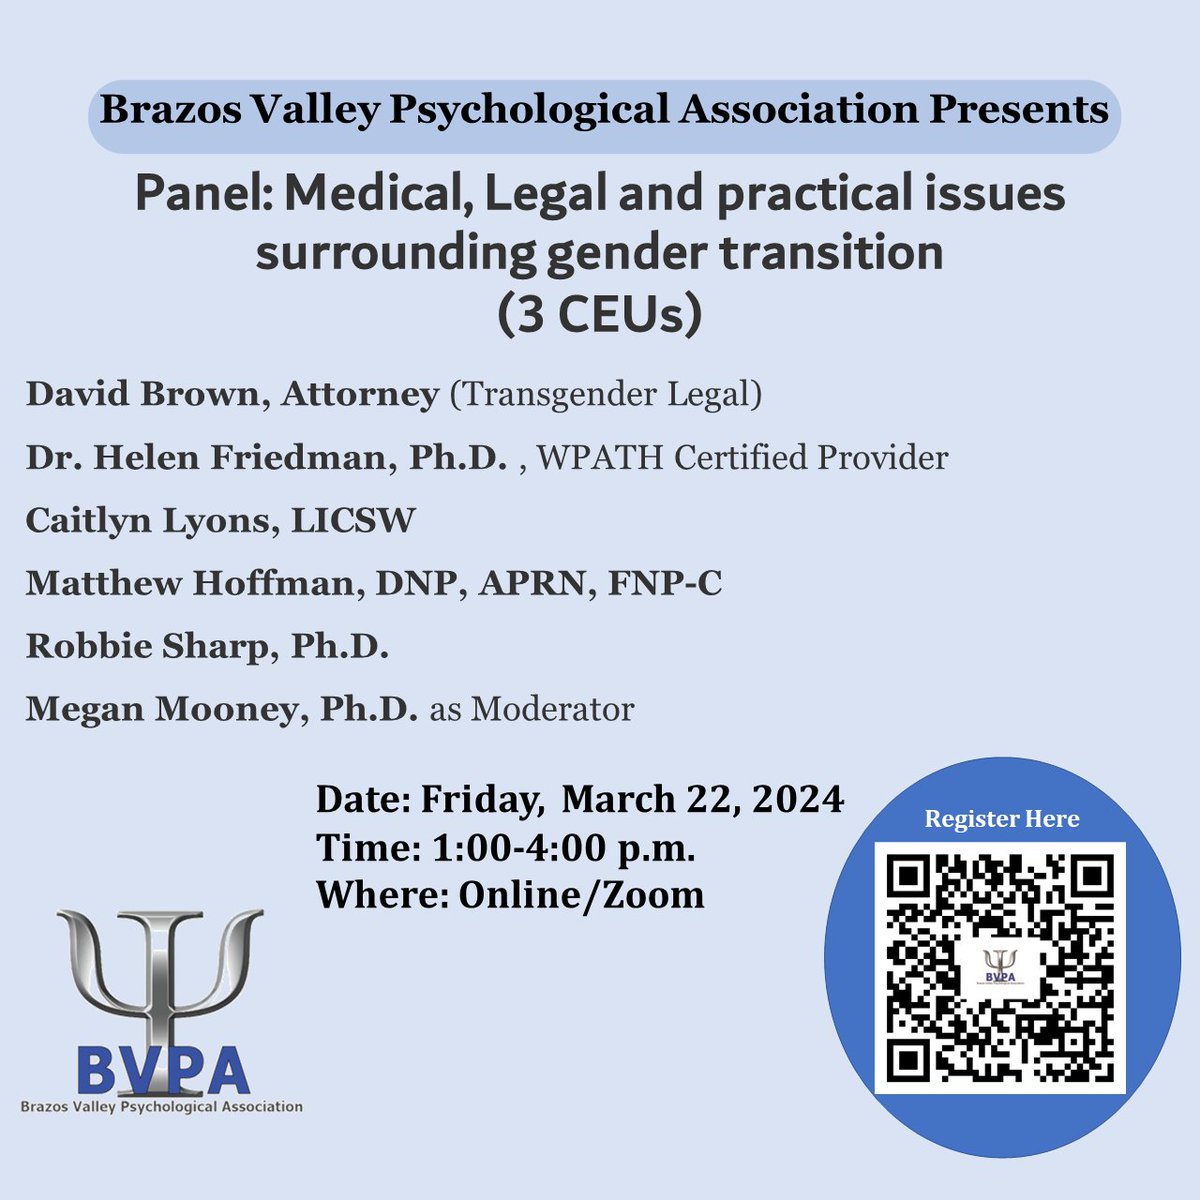 Join us for a #paneldiscussion on the #medical #Legal and practical issues surrounding #gendertransition #bvpa #tpa #apa #tamft #aamft #lpc #lcsw #phd #lmft #genderissues #LGBTQIA #gay #transgender #seuxalidentity #transitioning #continuingeducation #virtualtraining #ceu #texas